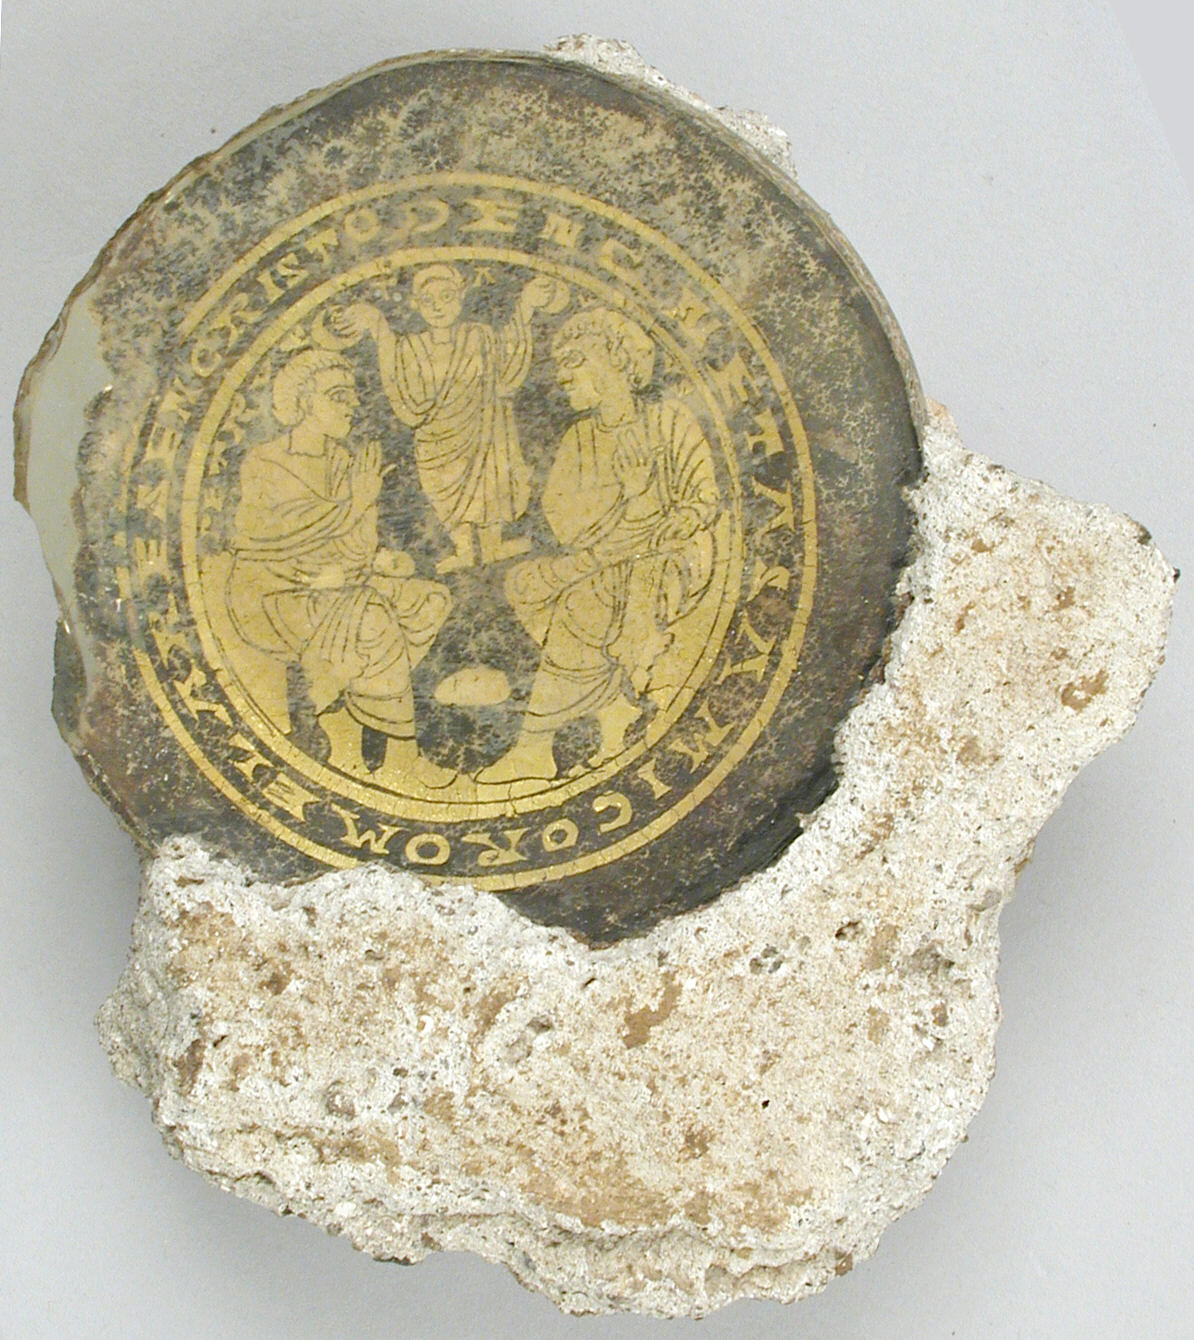 Bowl Base with Christ Giving Martyrs' Crowns to Saints Peter and Paul